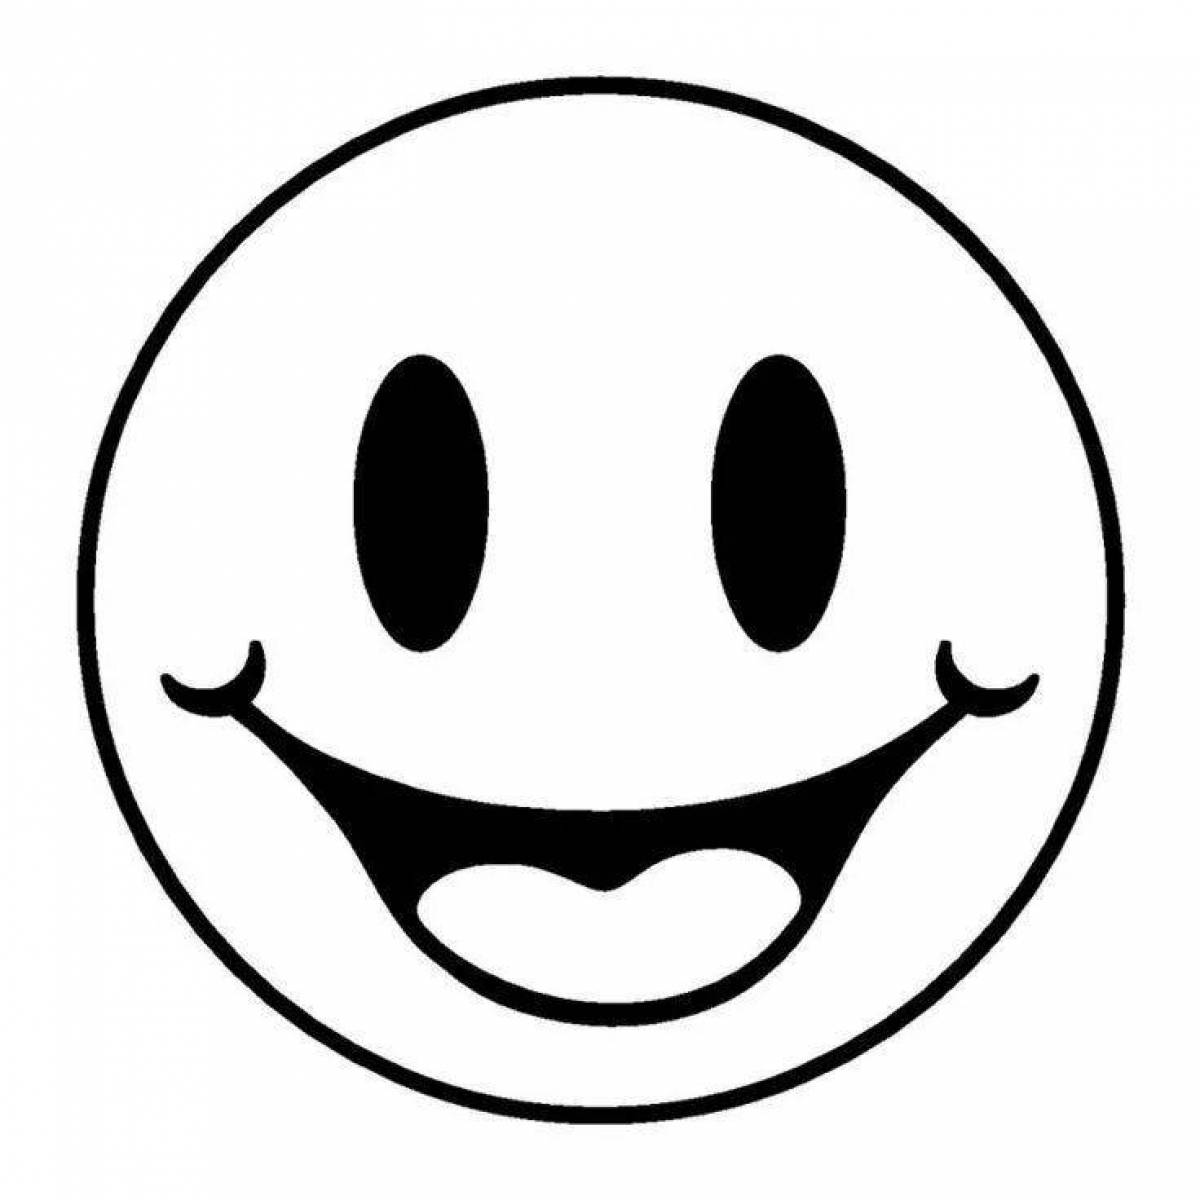 Witty smiley face coloring book